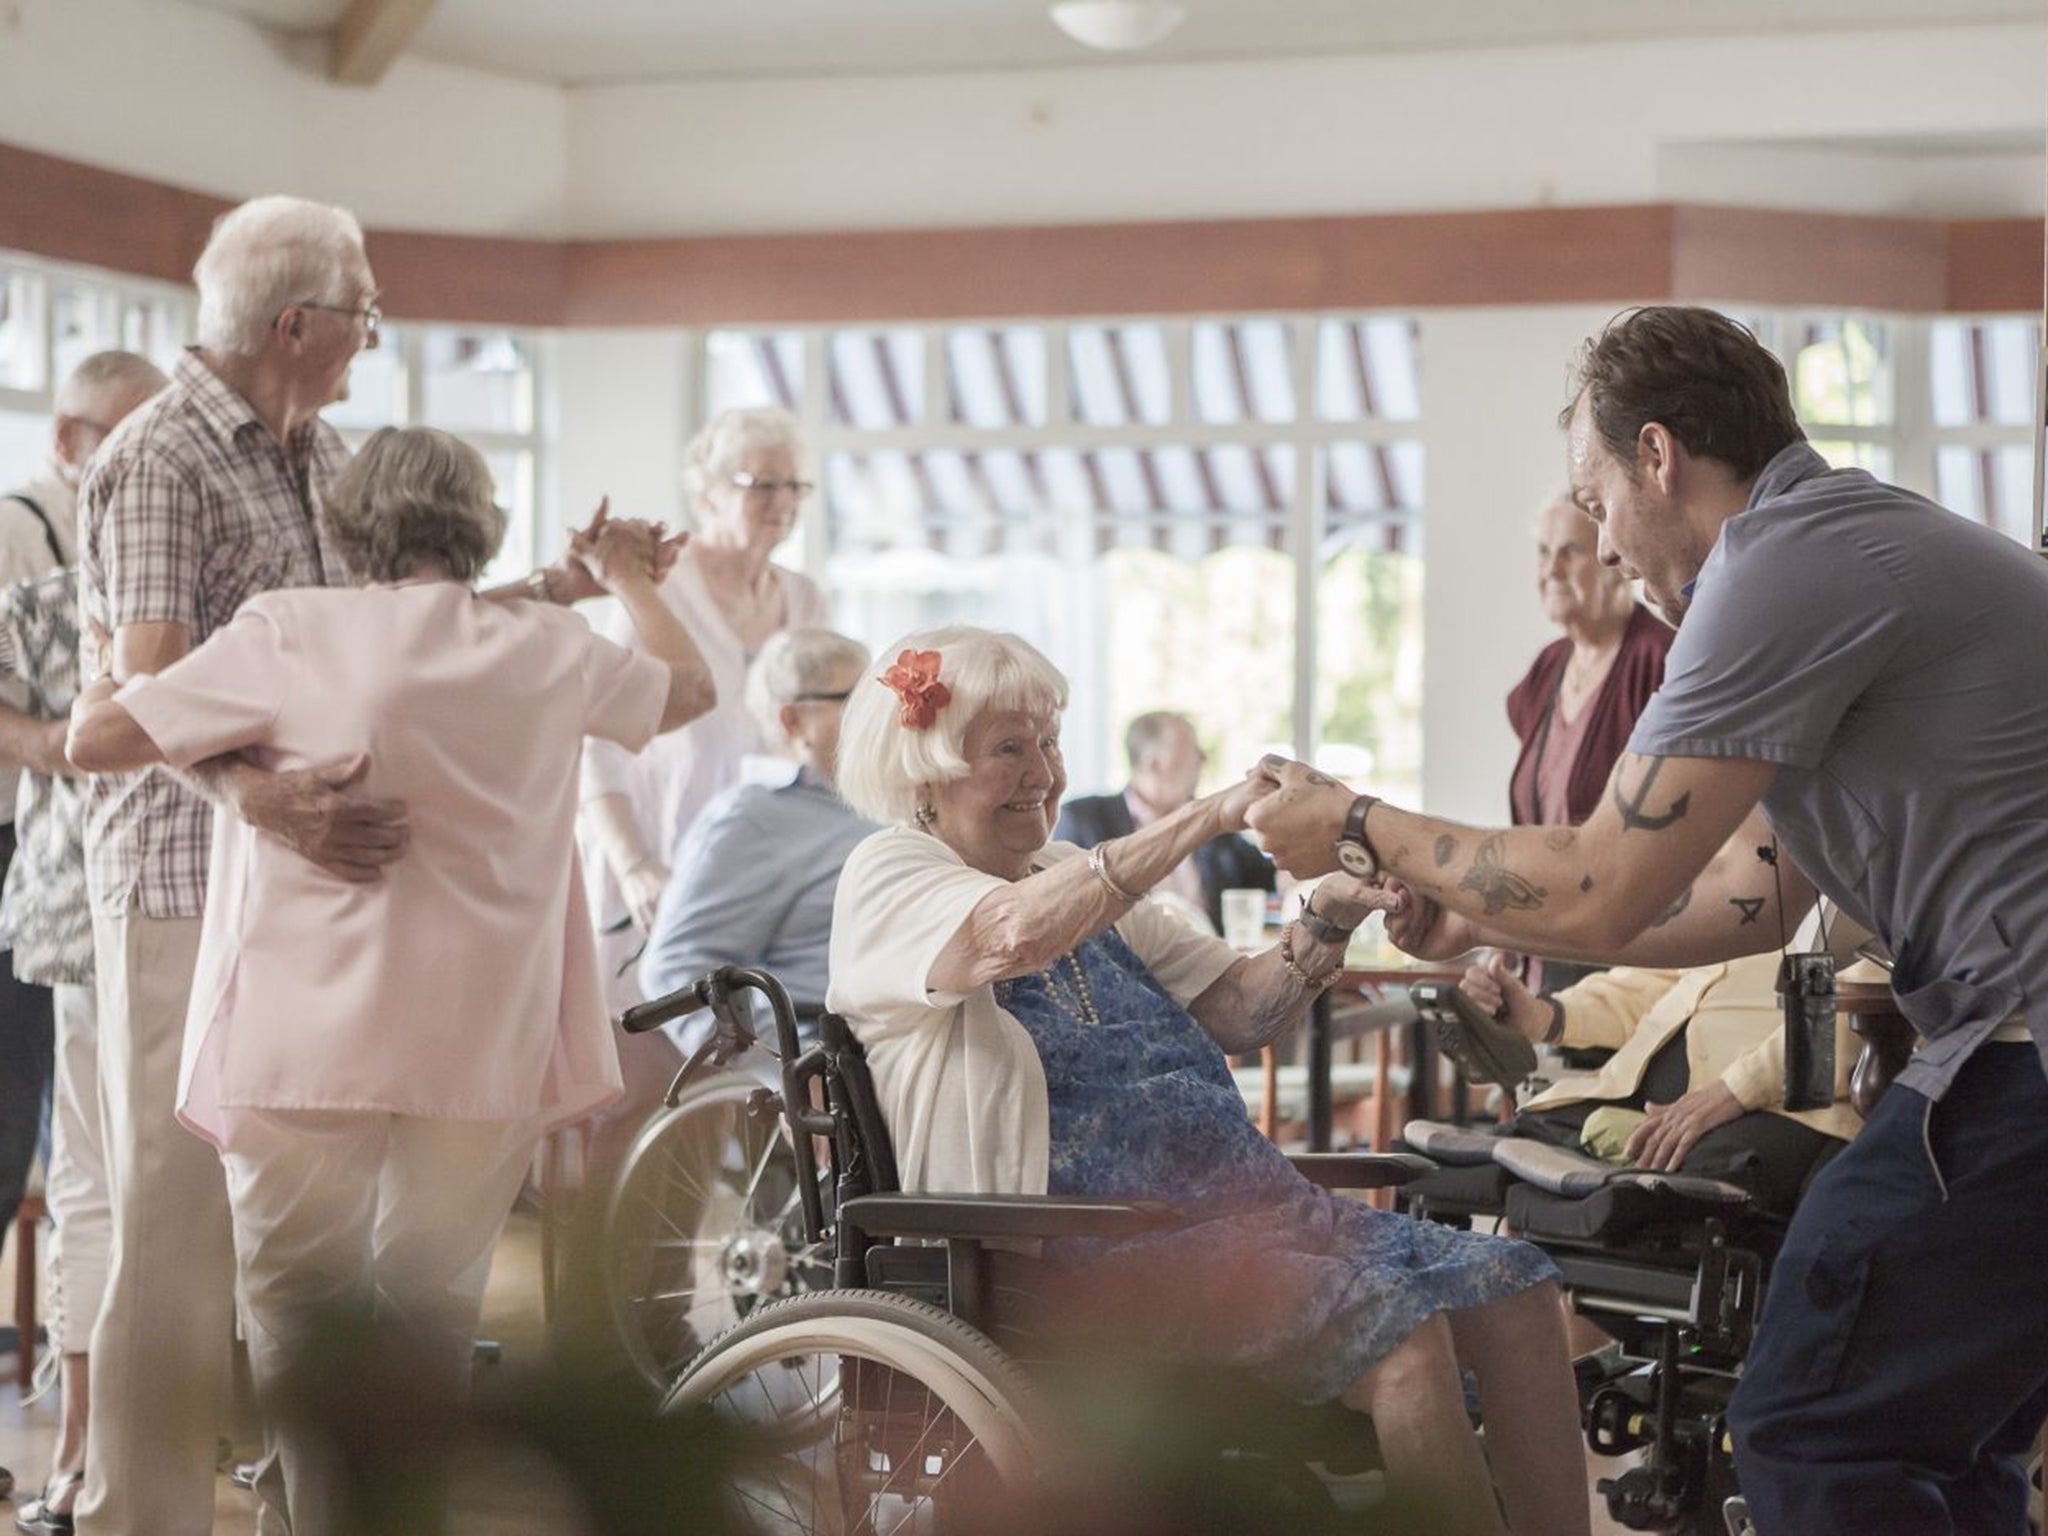 A care home in Liseberg, Sweden, puts free music to good use